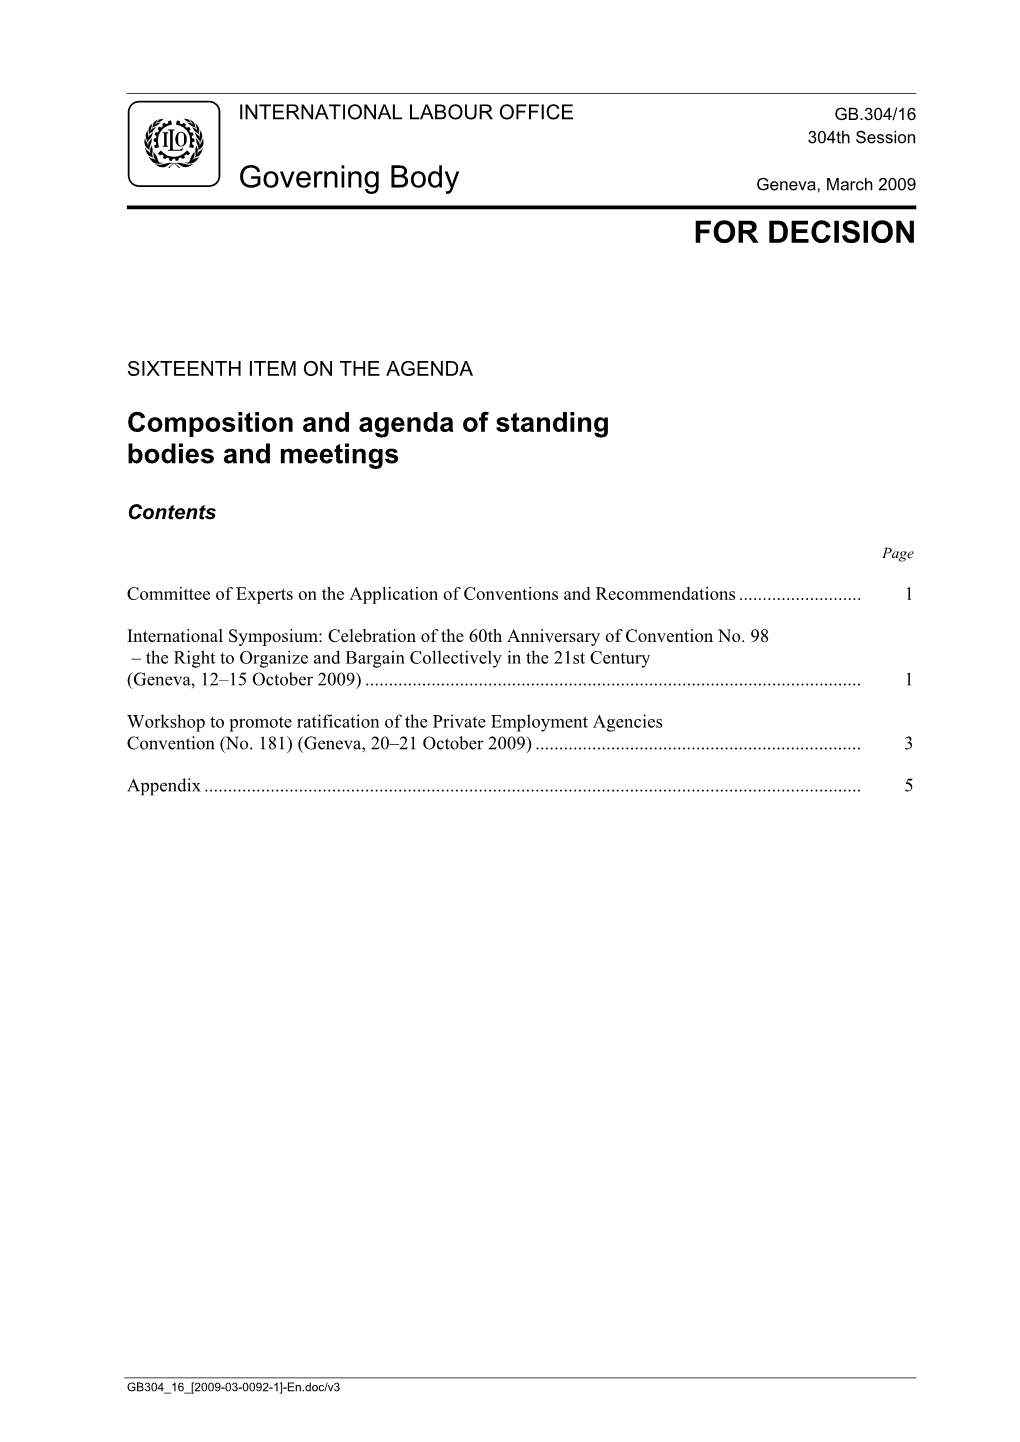 Composition and Agenda of Standing Bodies and Meetings